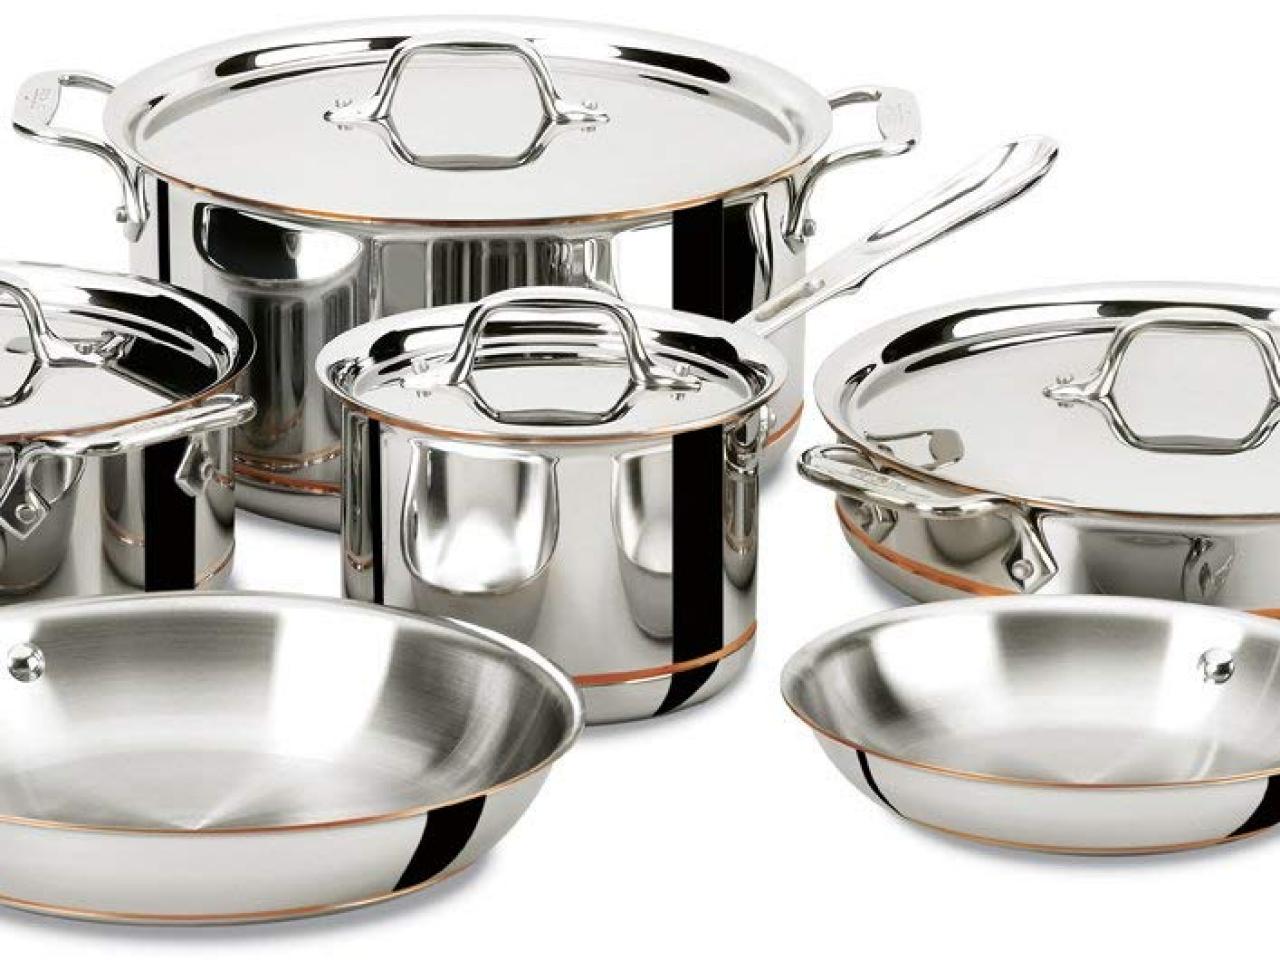 https://food.fnr.sndimg.com/content/dam/images/food/products/2019/5/2/rx_all-clad-copper-core-5-ply-bonded-dishwasher-safe-cookware-set.jpeg.rend.hgtvcom.1280.960.suffix/1556809415849.jpeg